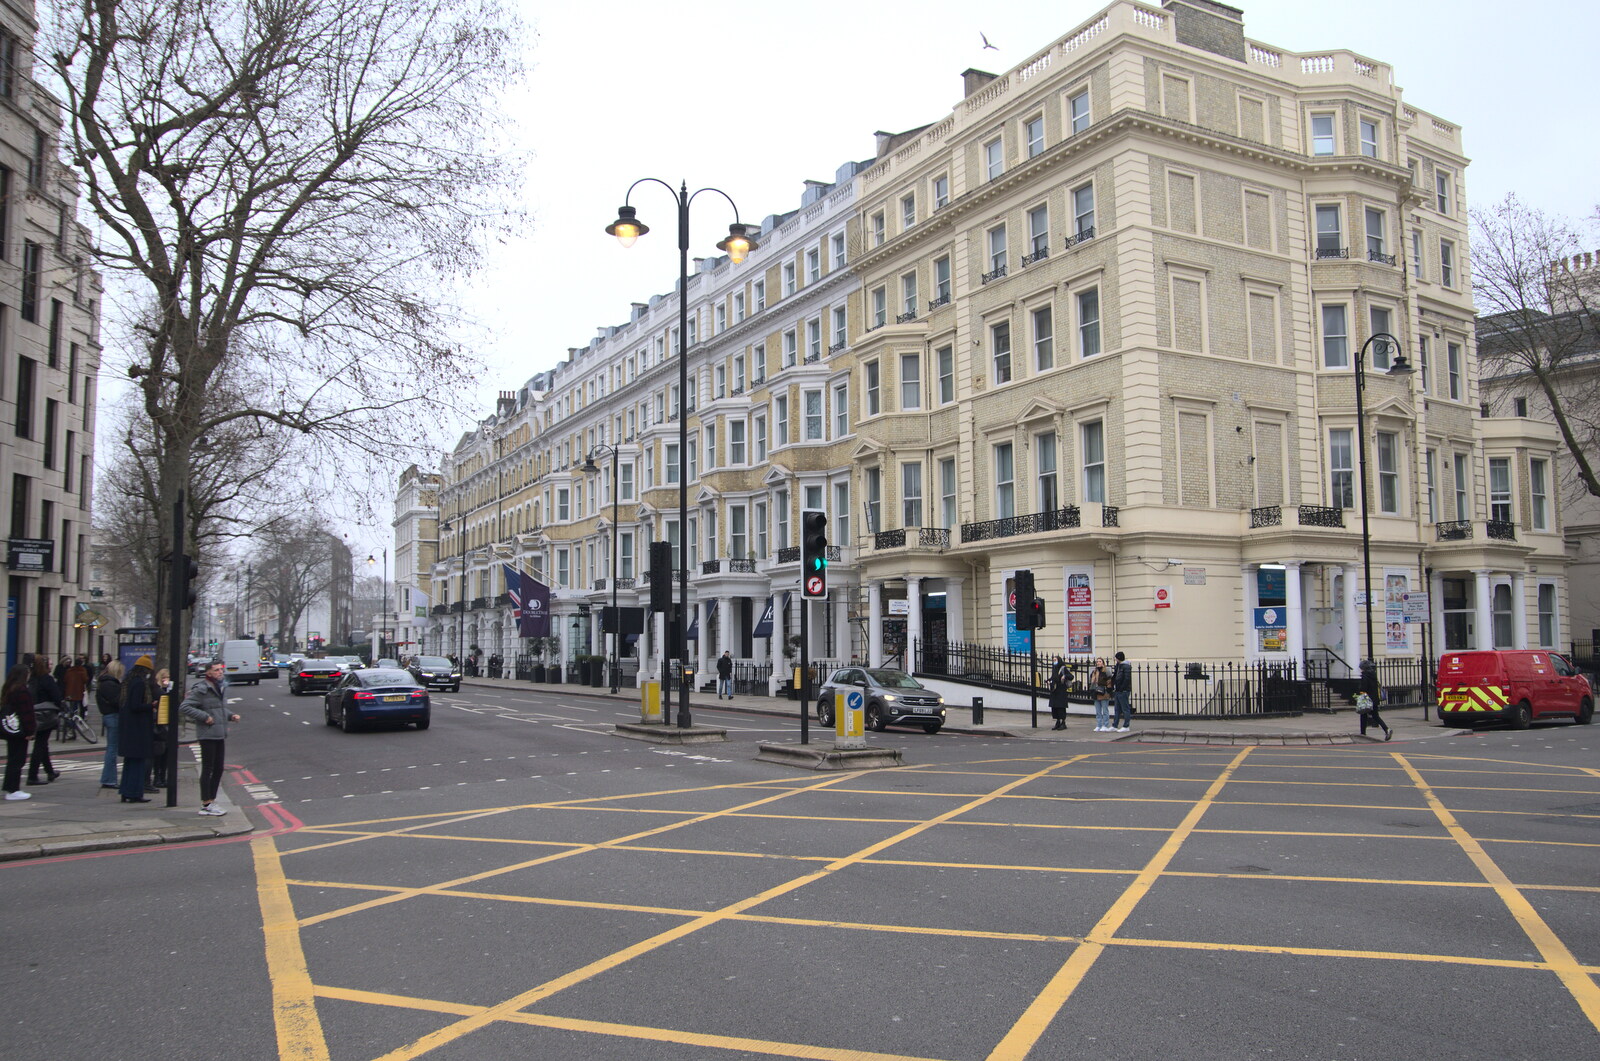 A block of houses on Gloucester Road from A Trip to the Natural History Museum, Kensington, London - 15th January 2022